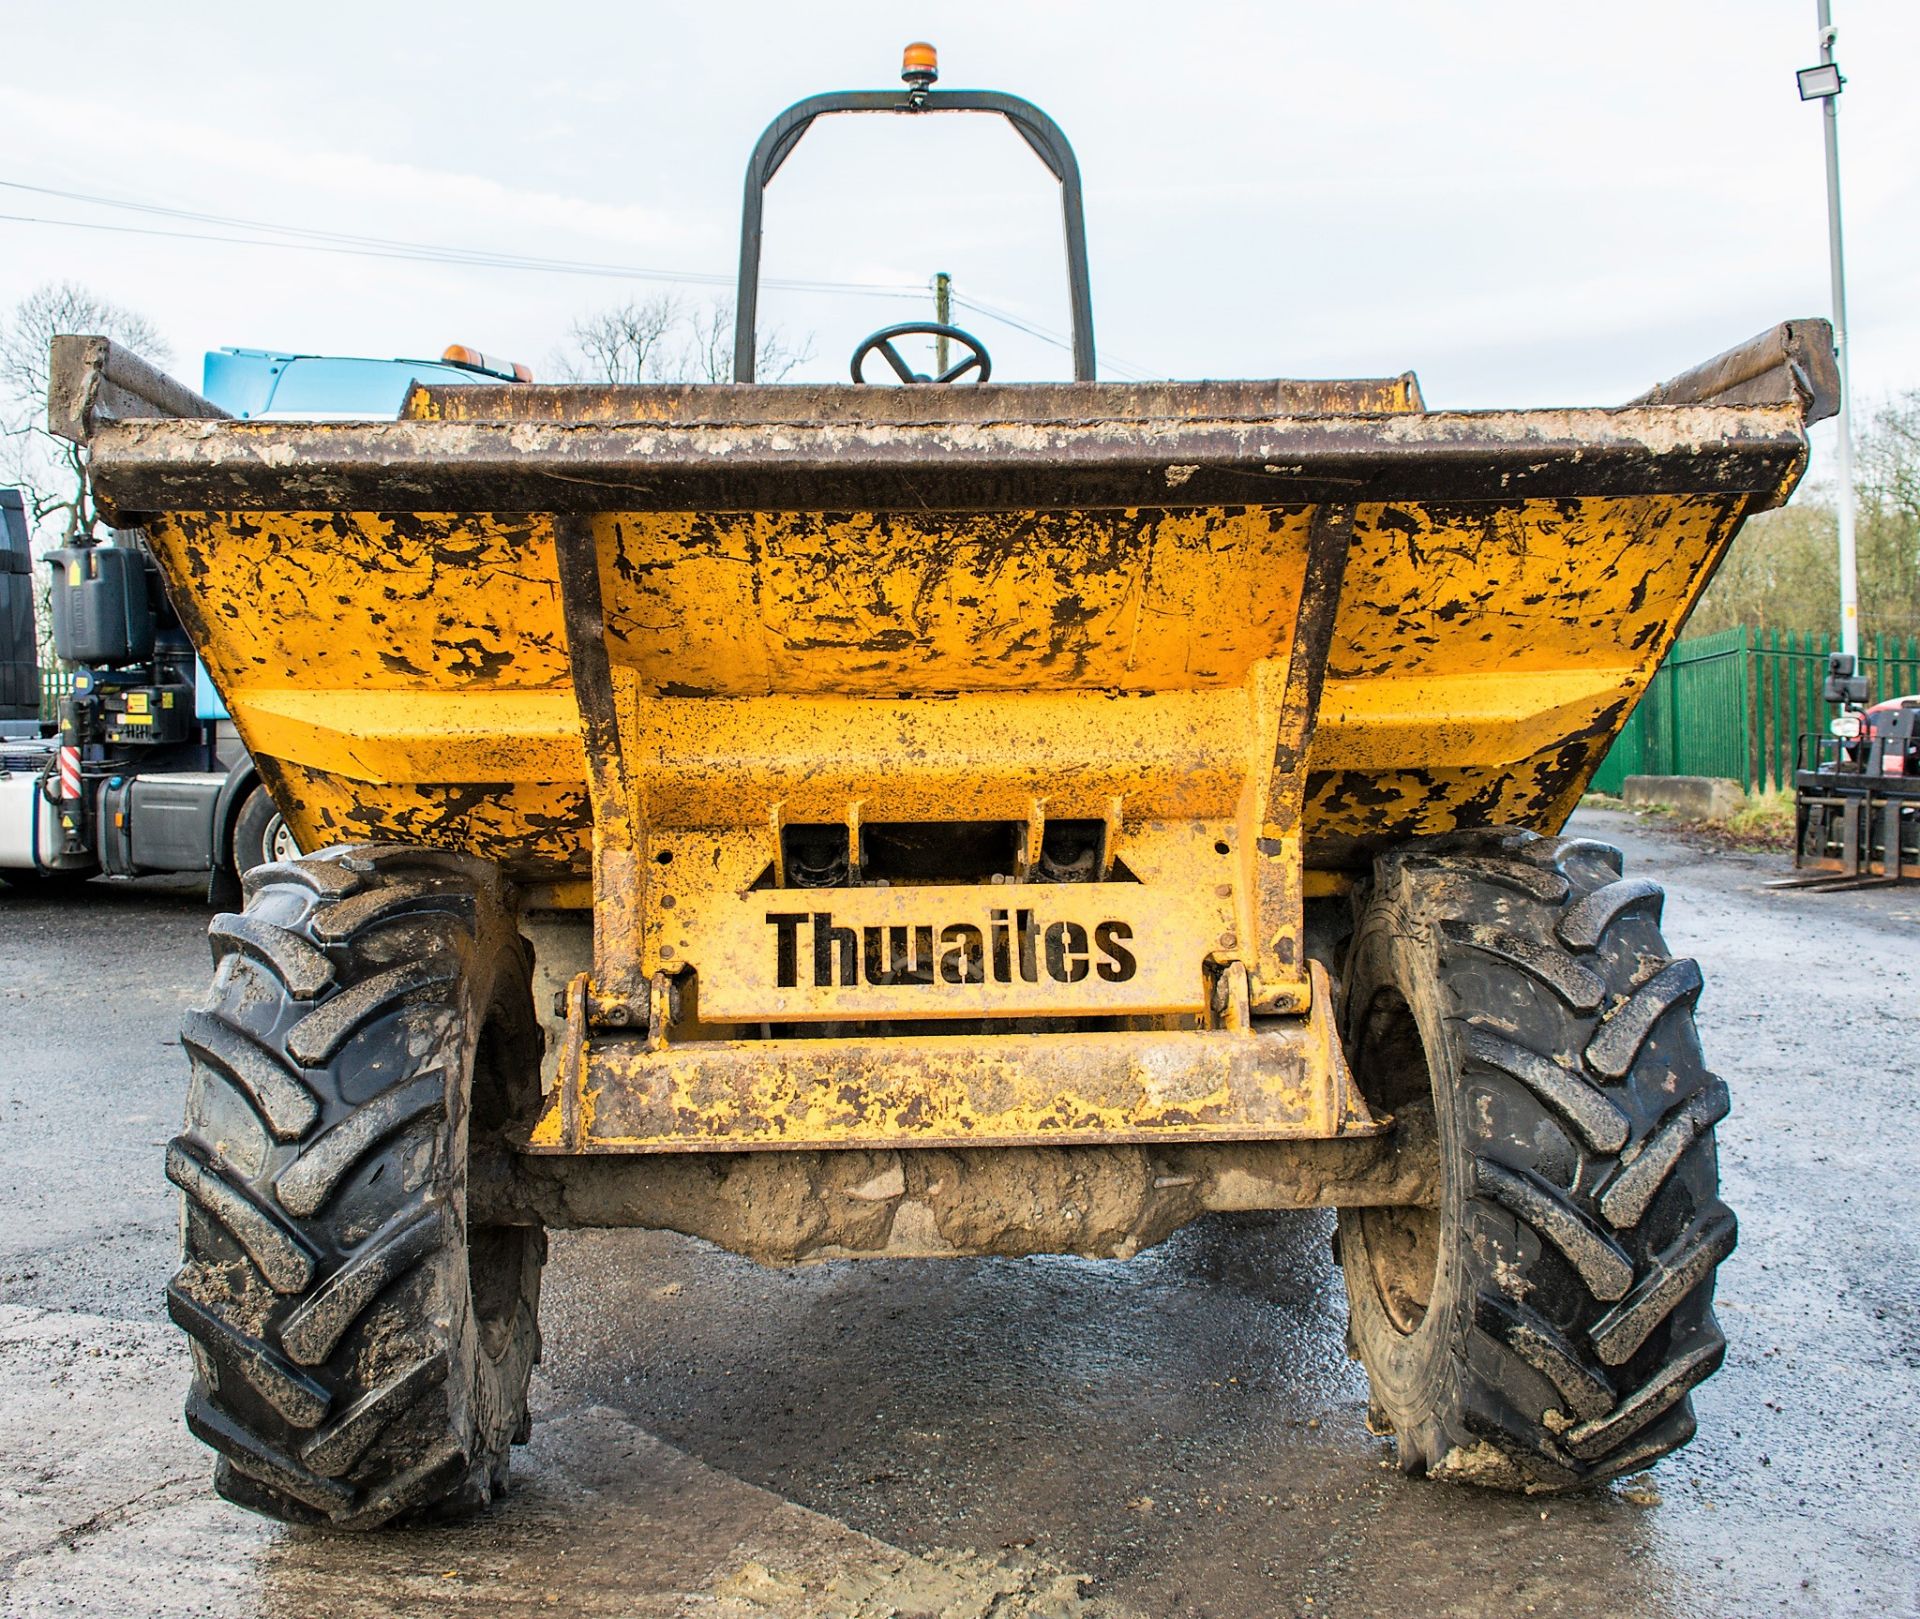 Thwaites 6 tonne straight skip dumper  Year: 2005 S/N: 7A6751 Recorded Hours: 4615 - Image 5 of 11